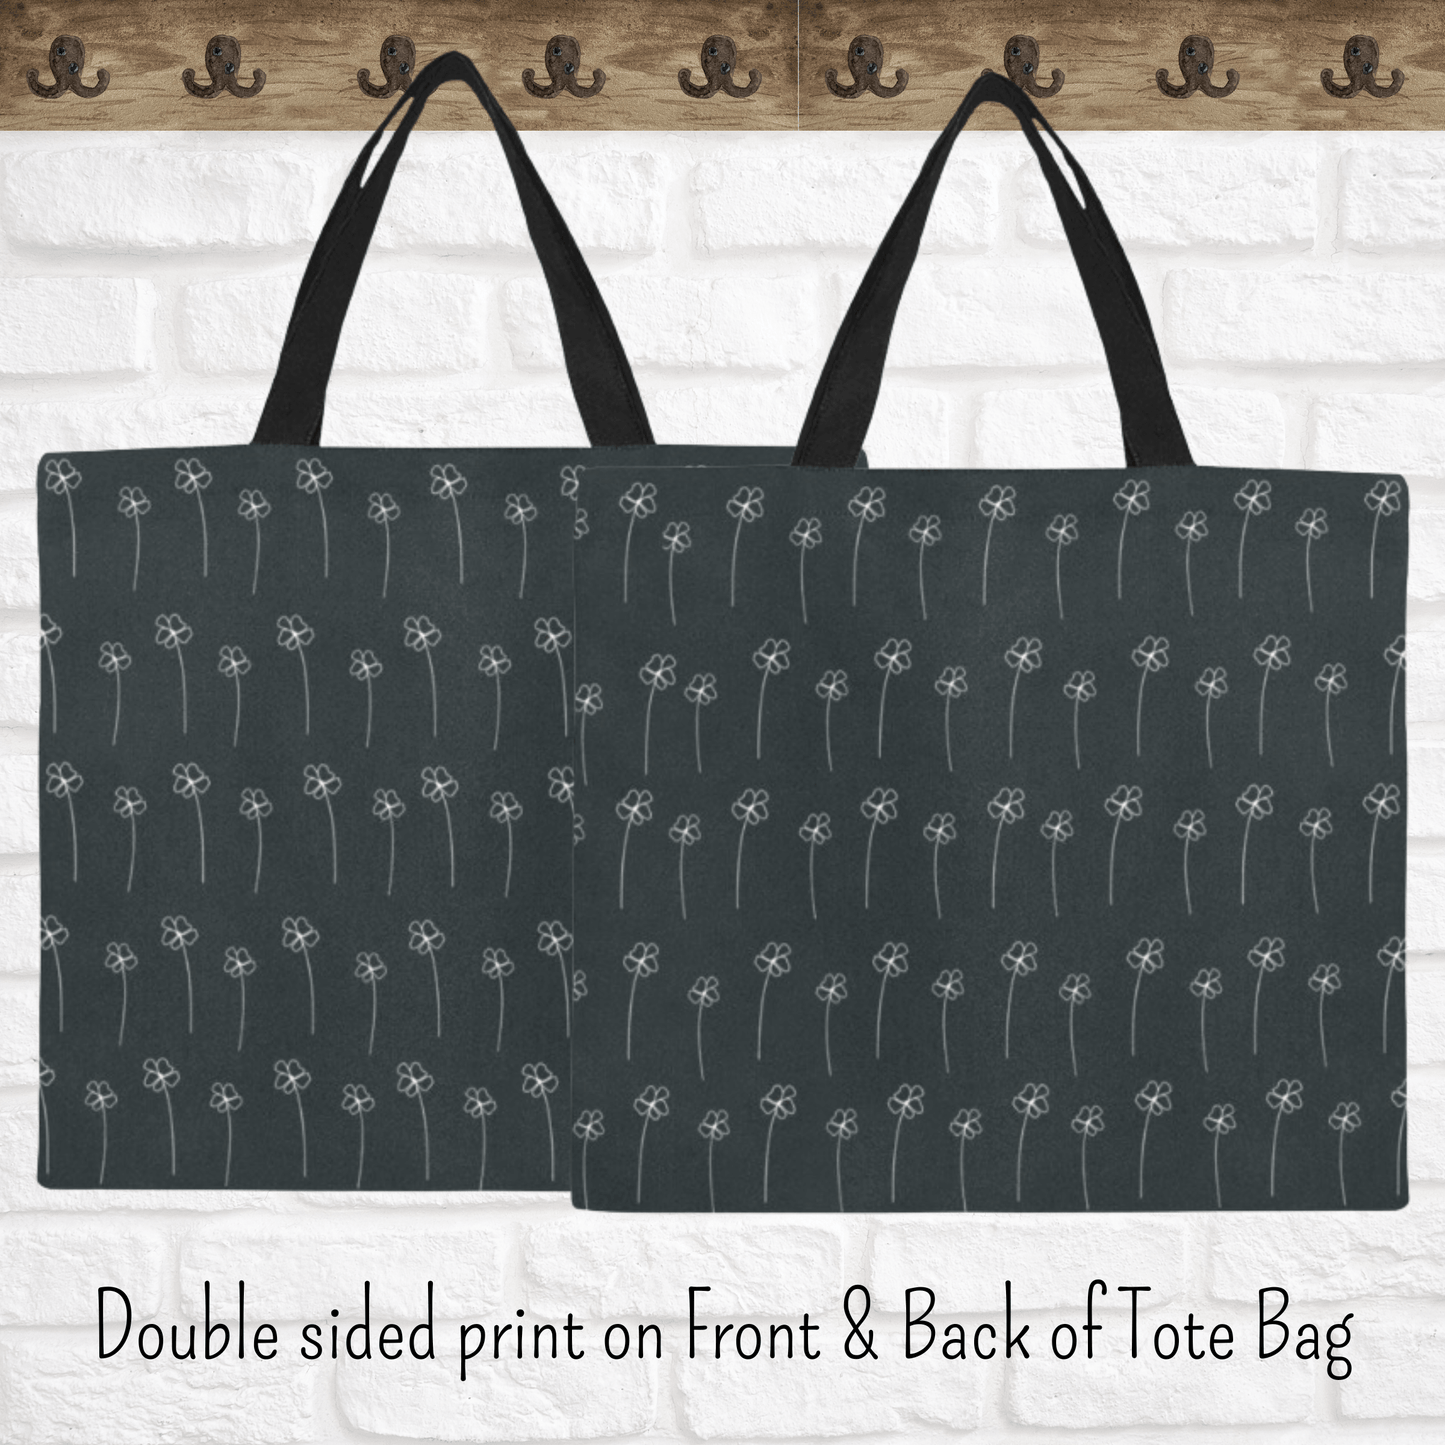 both sides of our canvas totes have flower print.